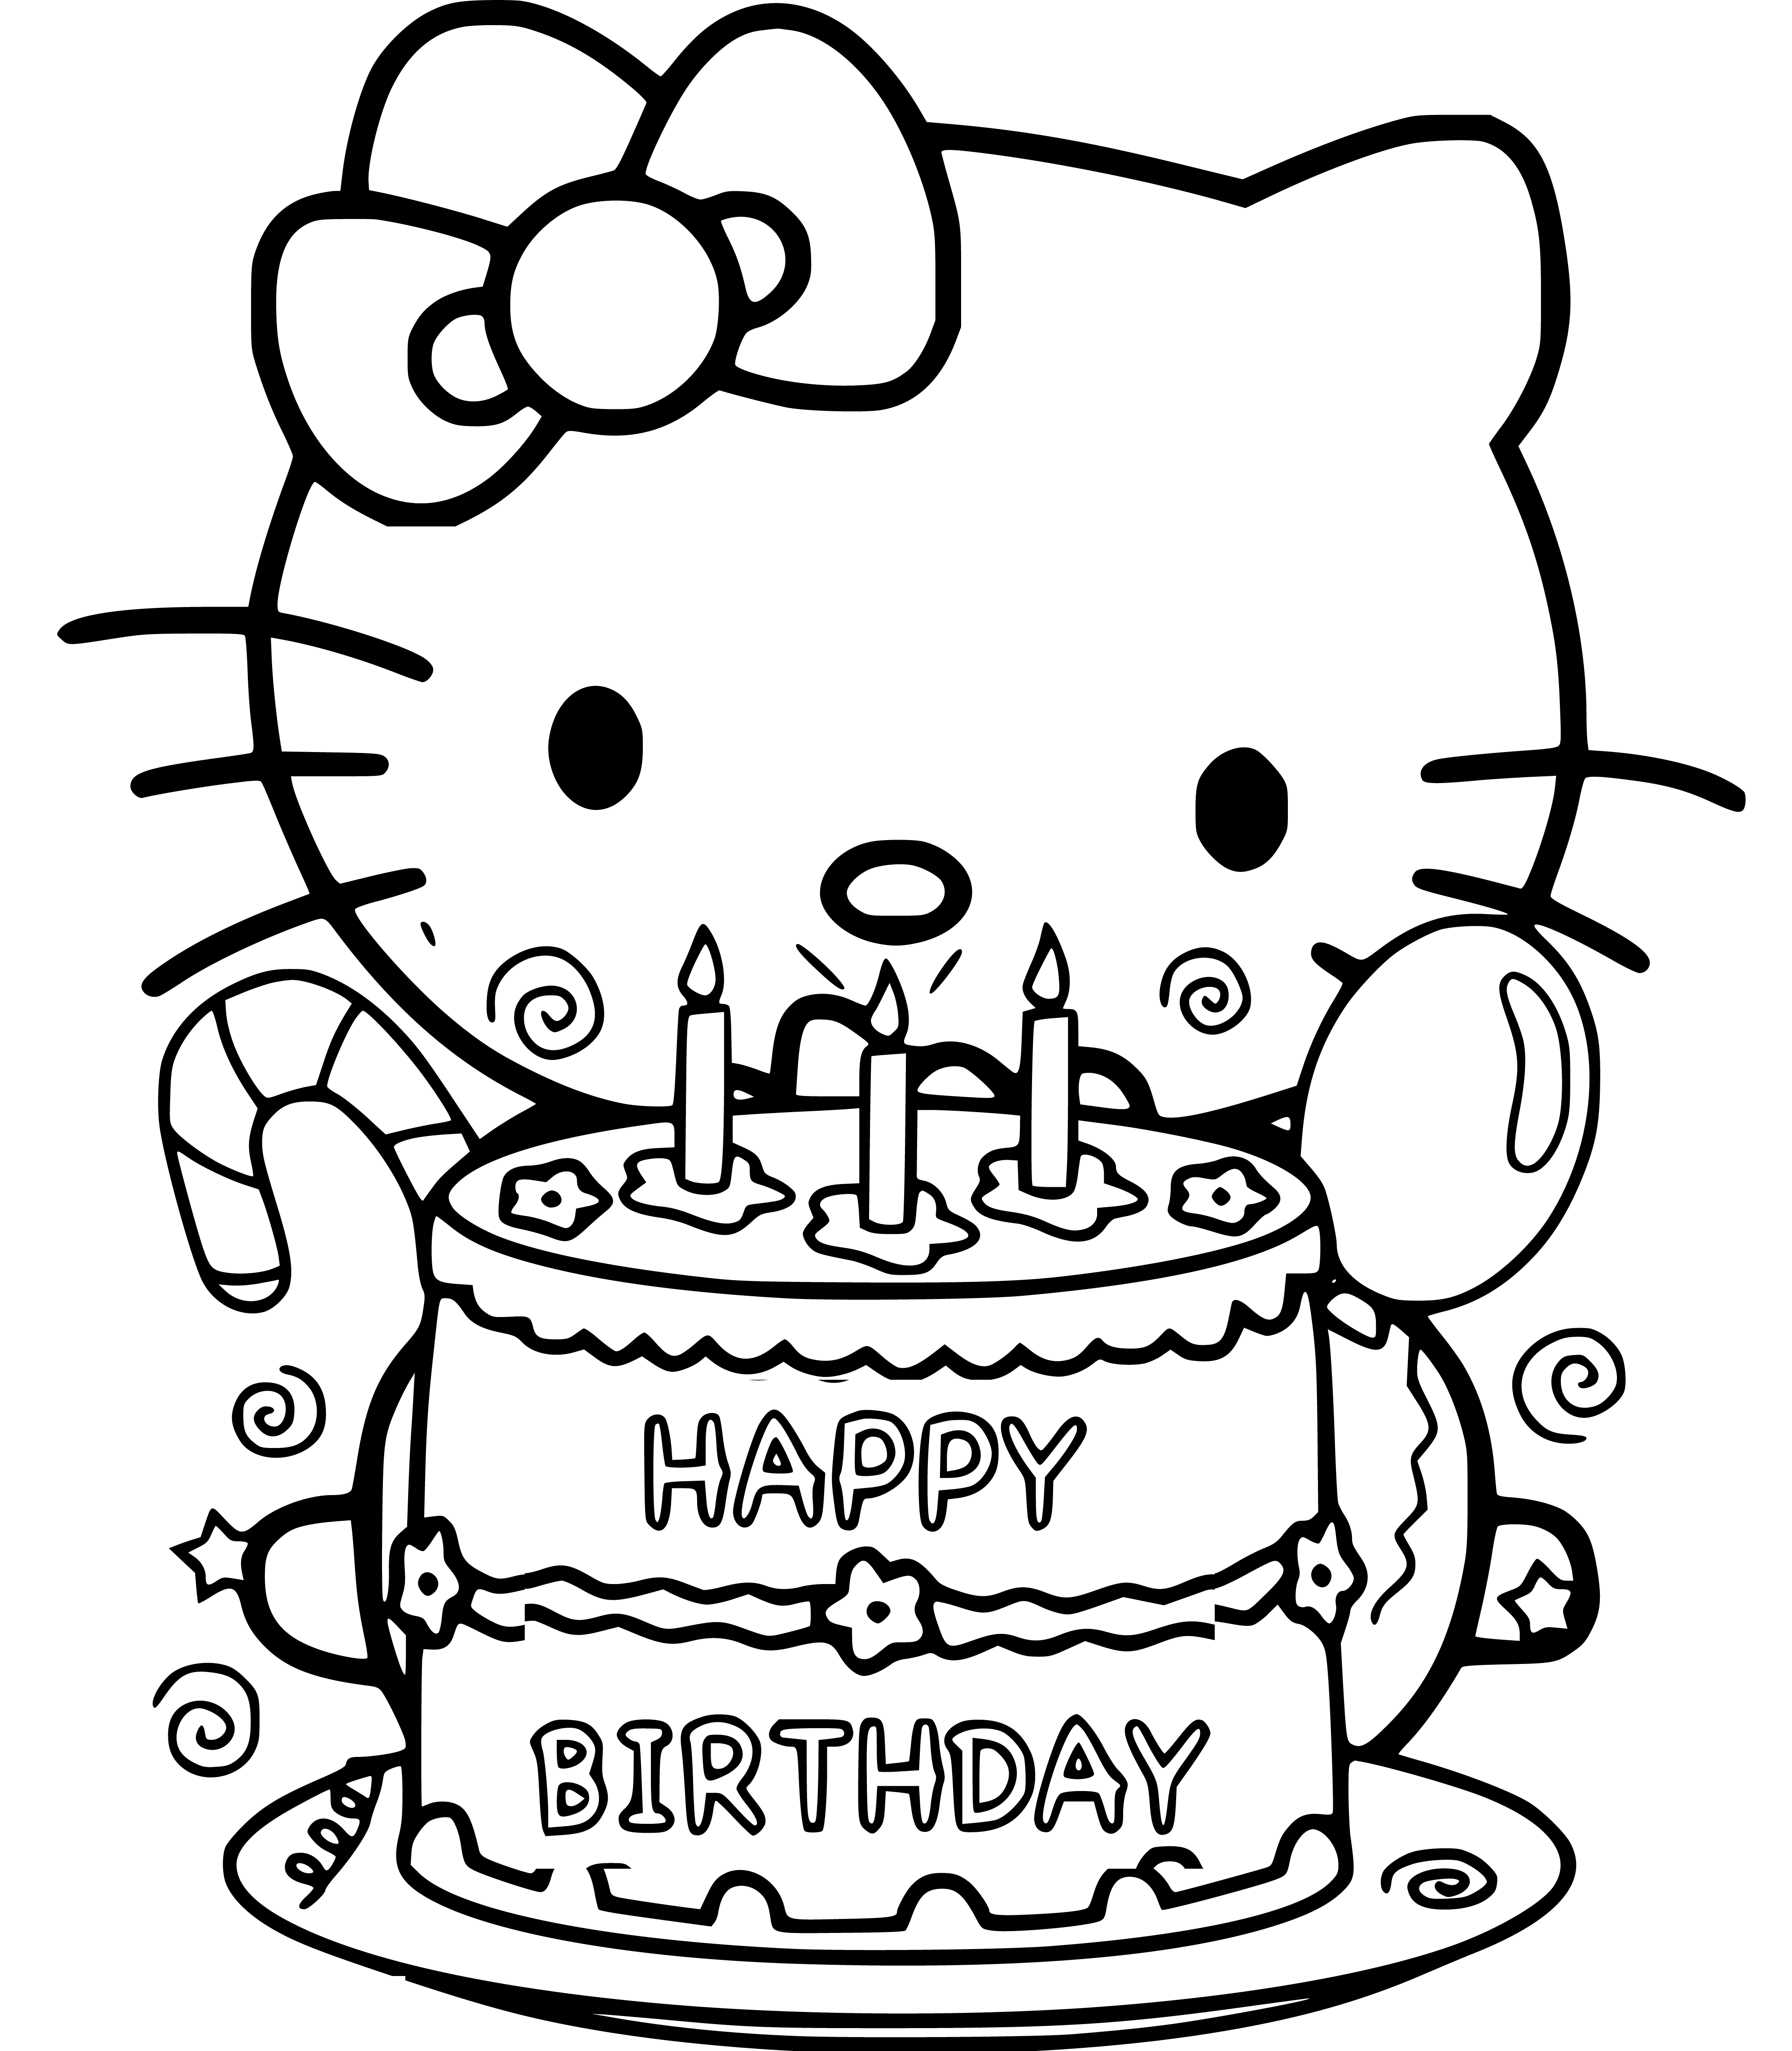 Printable Hello Kitty Happy Birthday Coloring Page for kids.